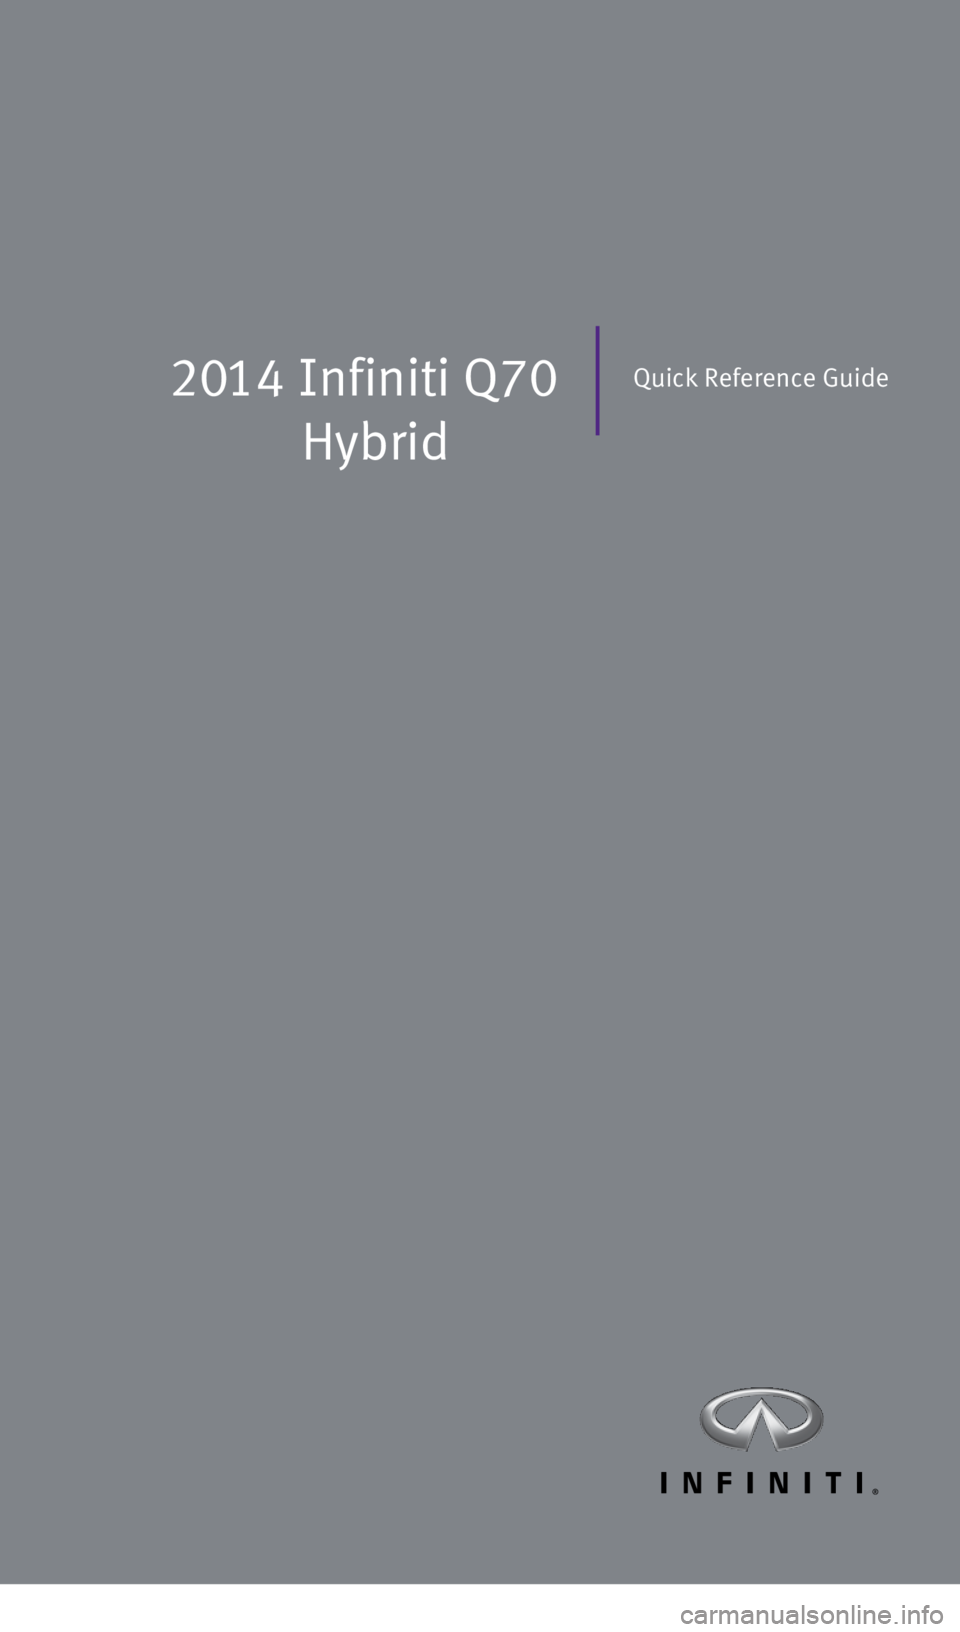 INFINITI Q70 HYBRID 2014  Quick Reference Guide 2014 Infiniti Q70
 
HybridQuick Reference Guide
1276459_14_M_Hybrid_QRG_112213.indd   311/22/13   9:38 AM 